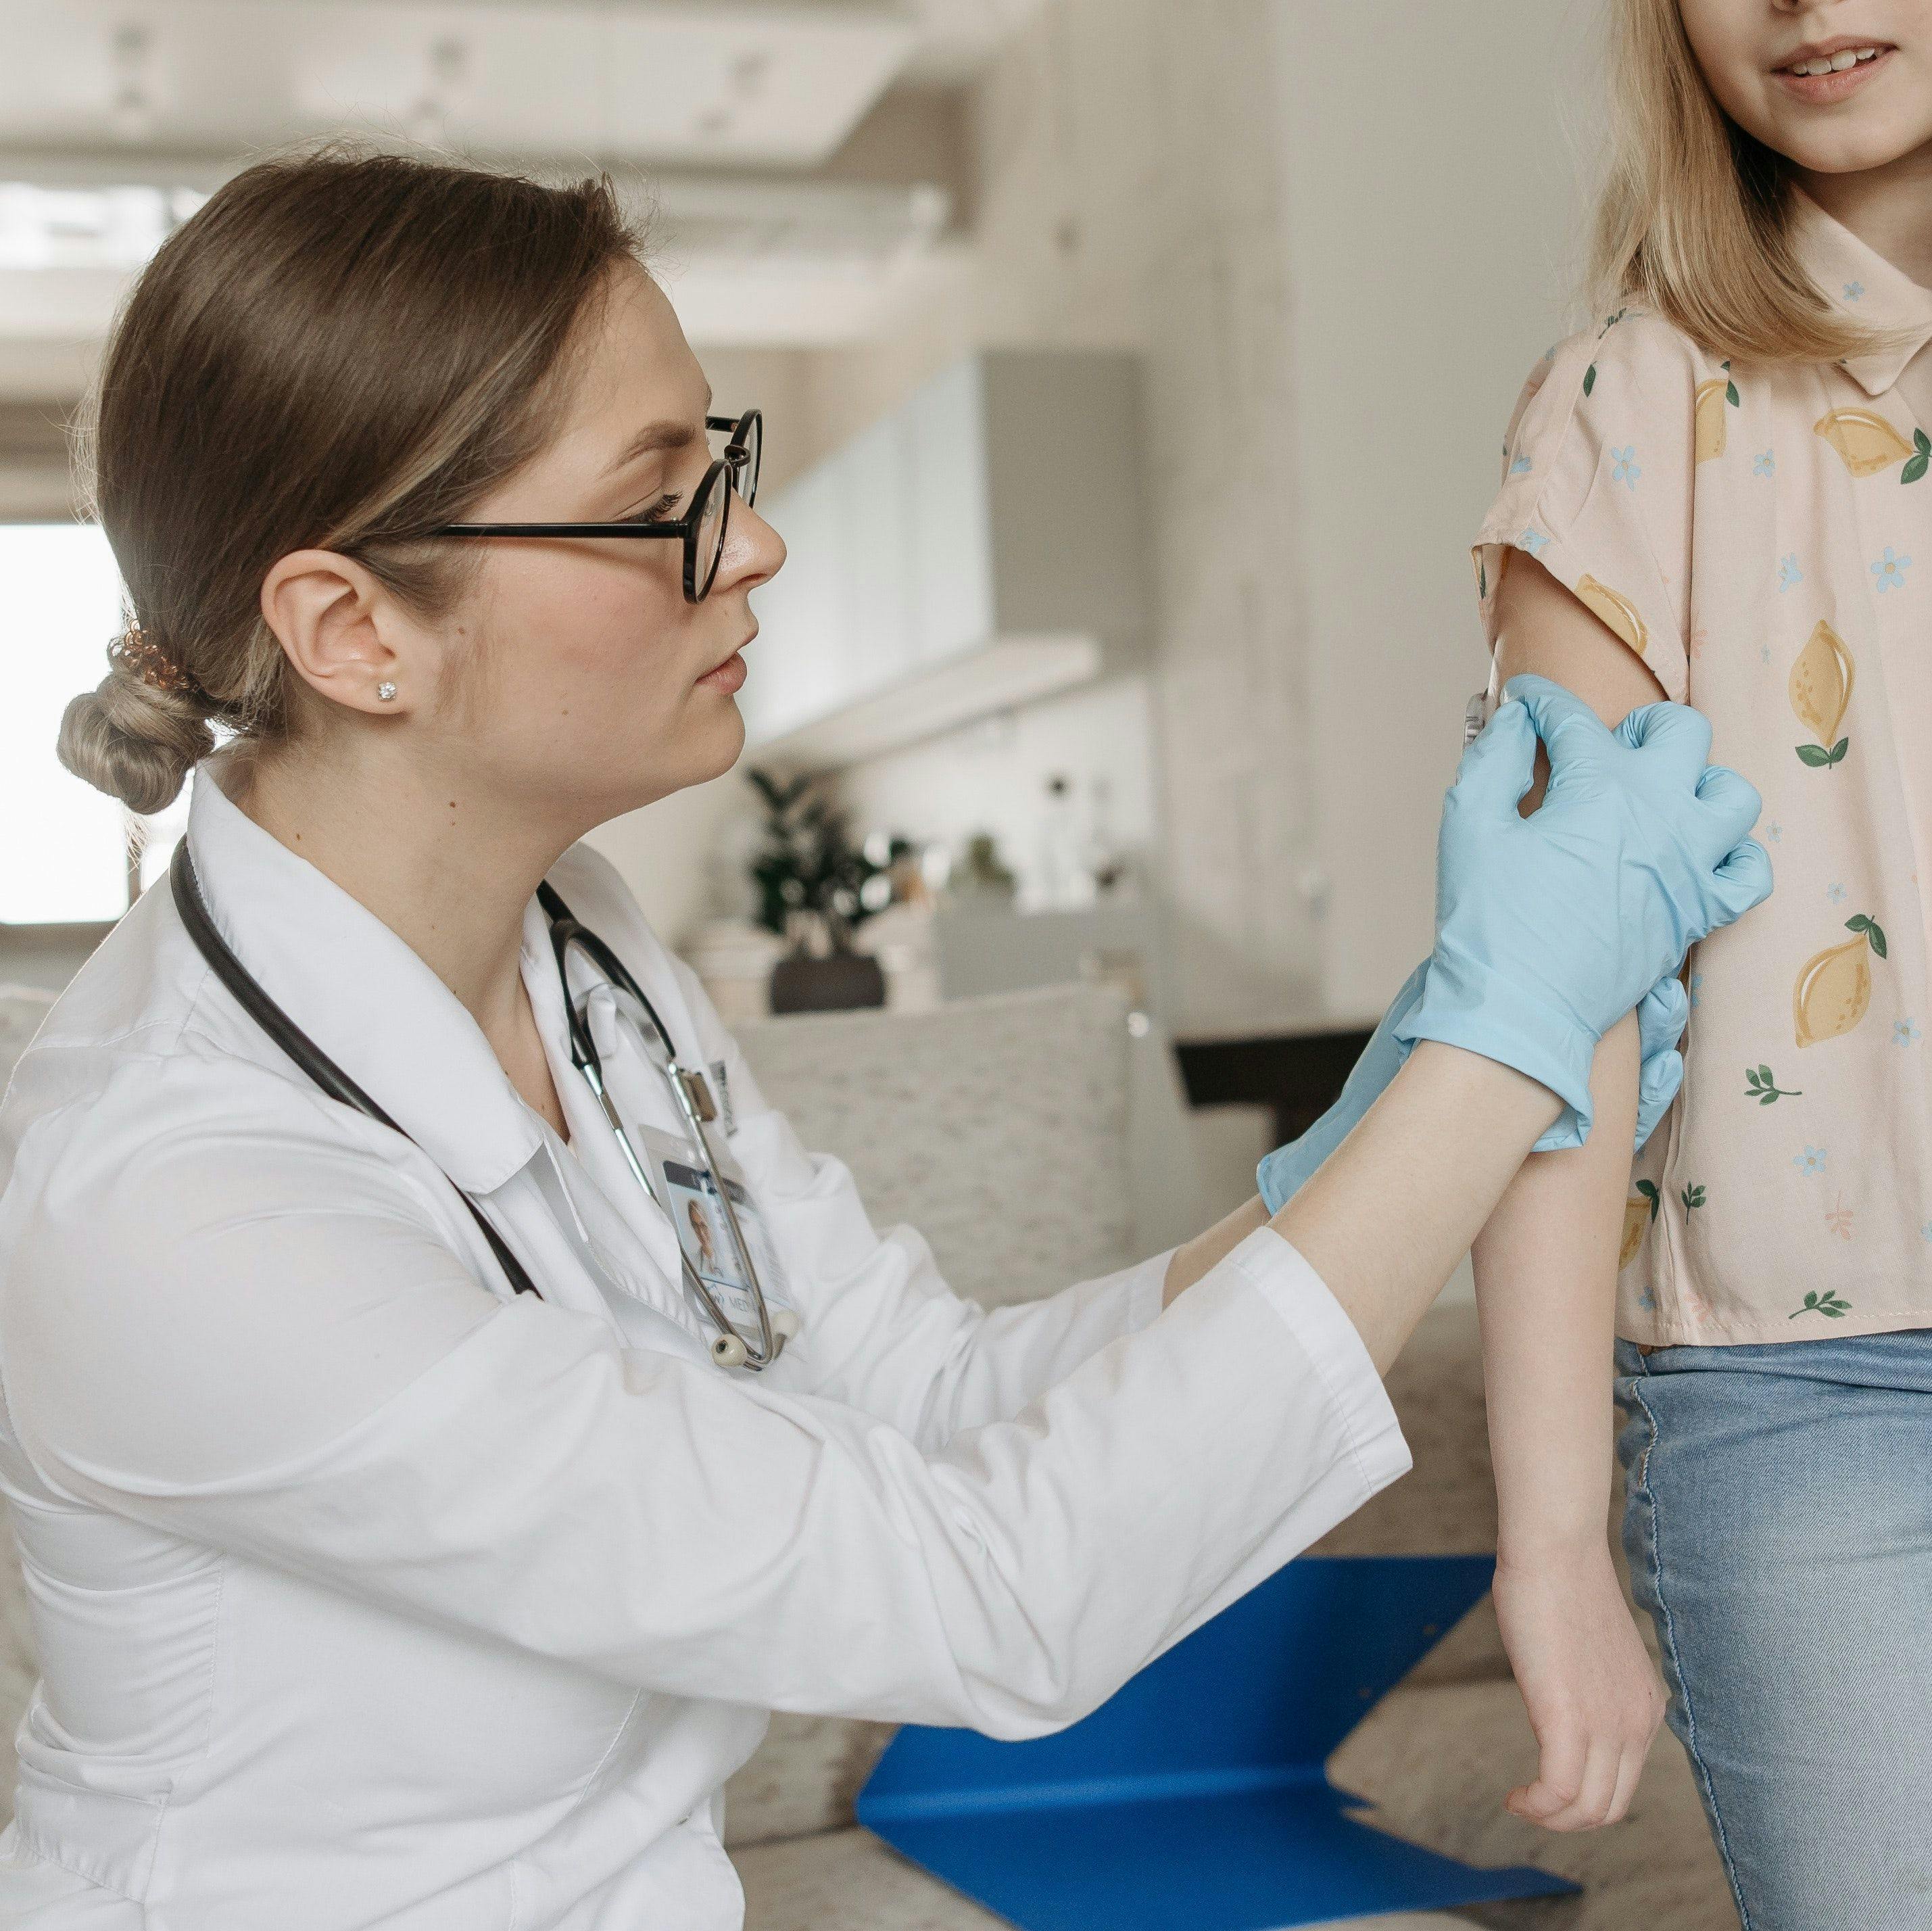 COVID-19 Vaccination is Safe, Effective for Children with Juvenile Idiopathic Arthritis